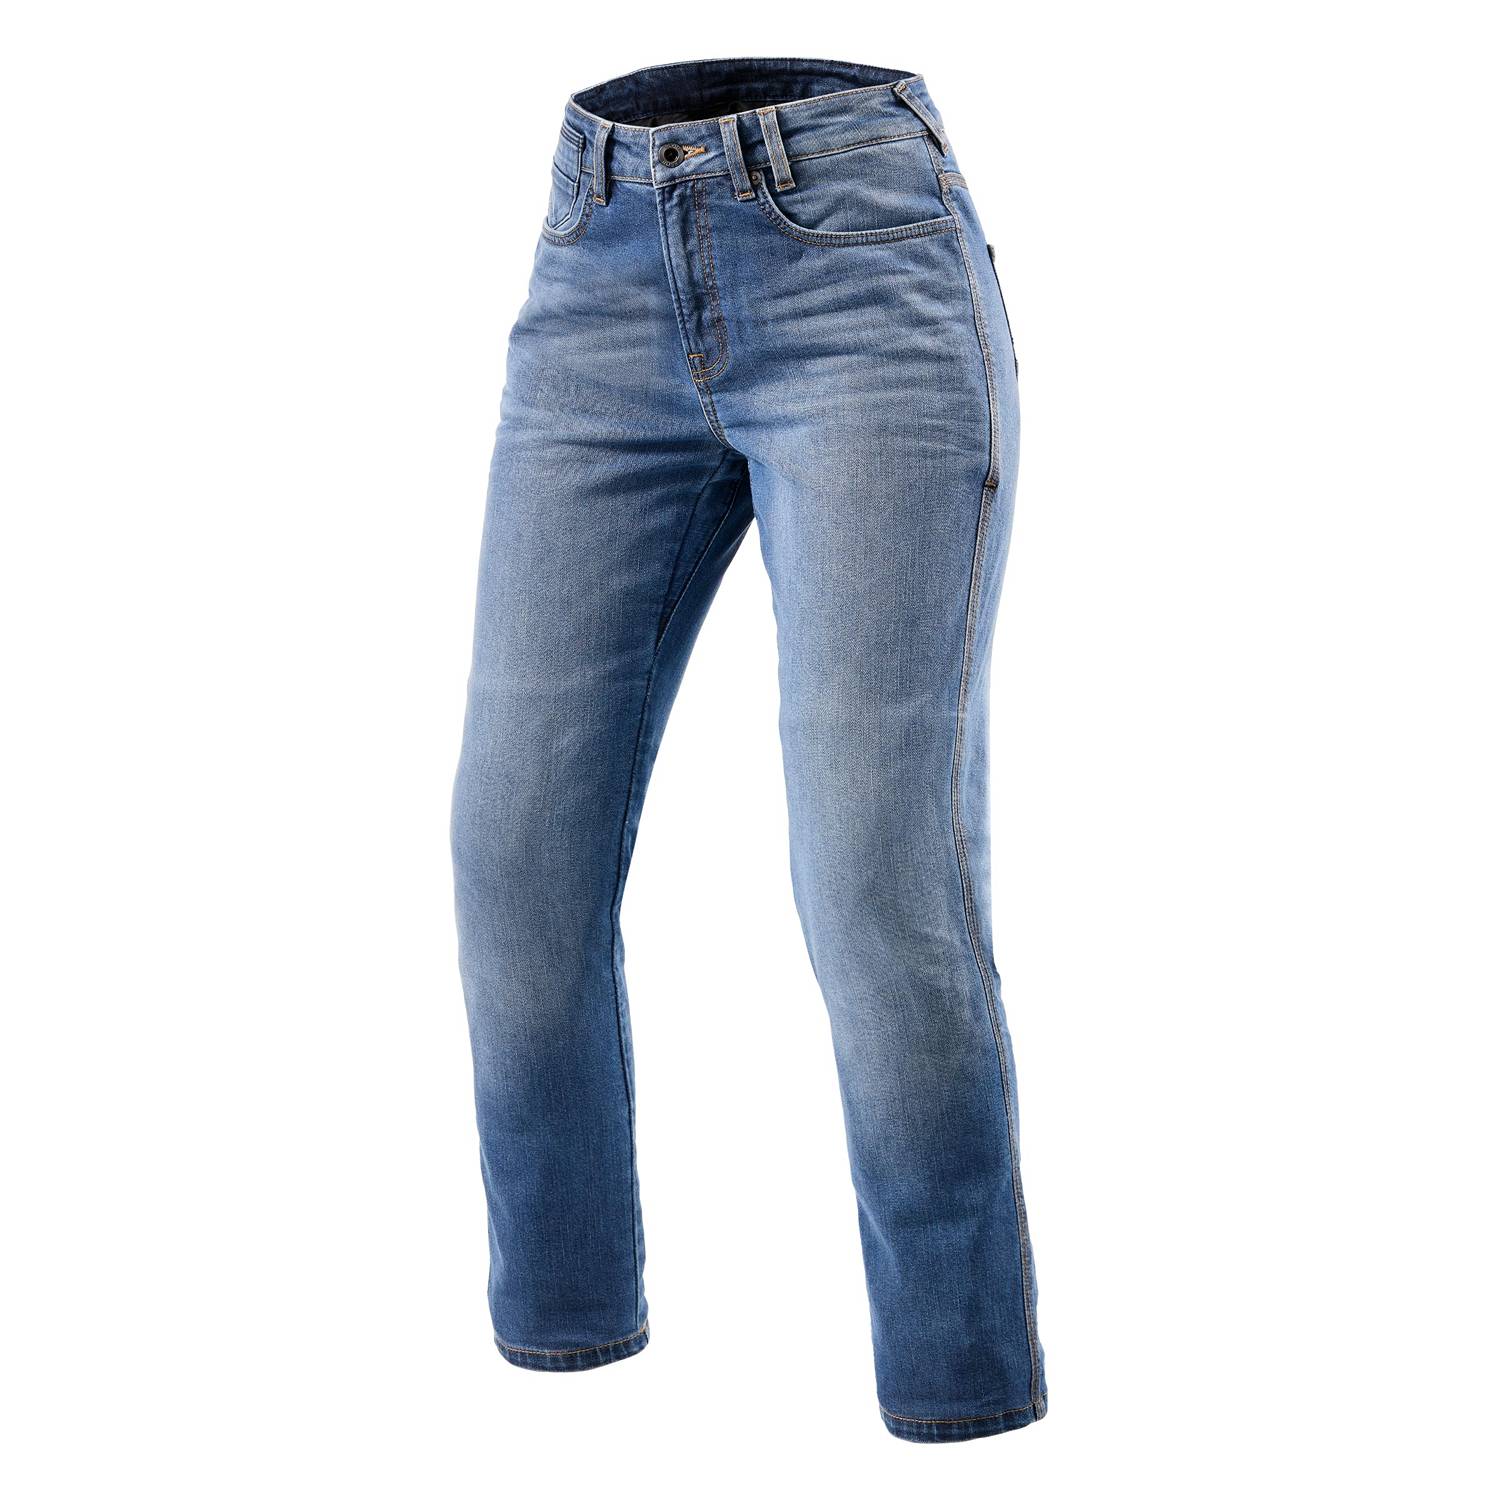 Image of REV'IT! Jeans Victoria 2 Ladies SF Classic Blue Used Motorcycle Jeans Größe L32/W30